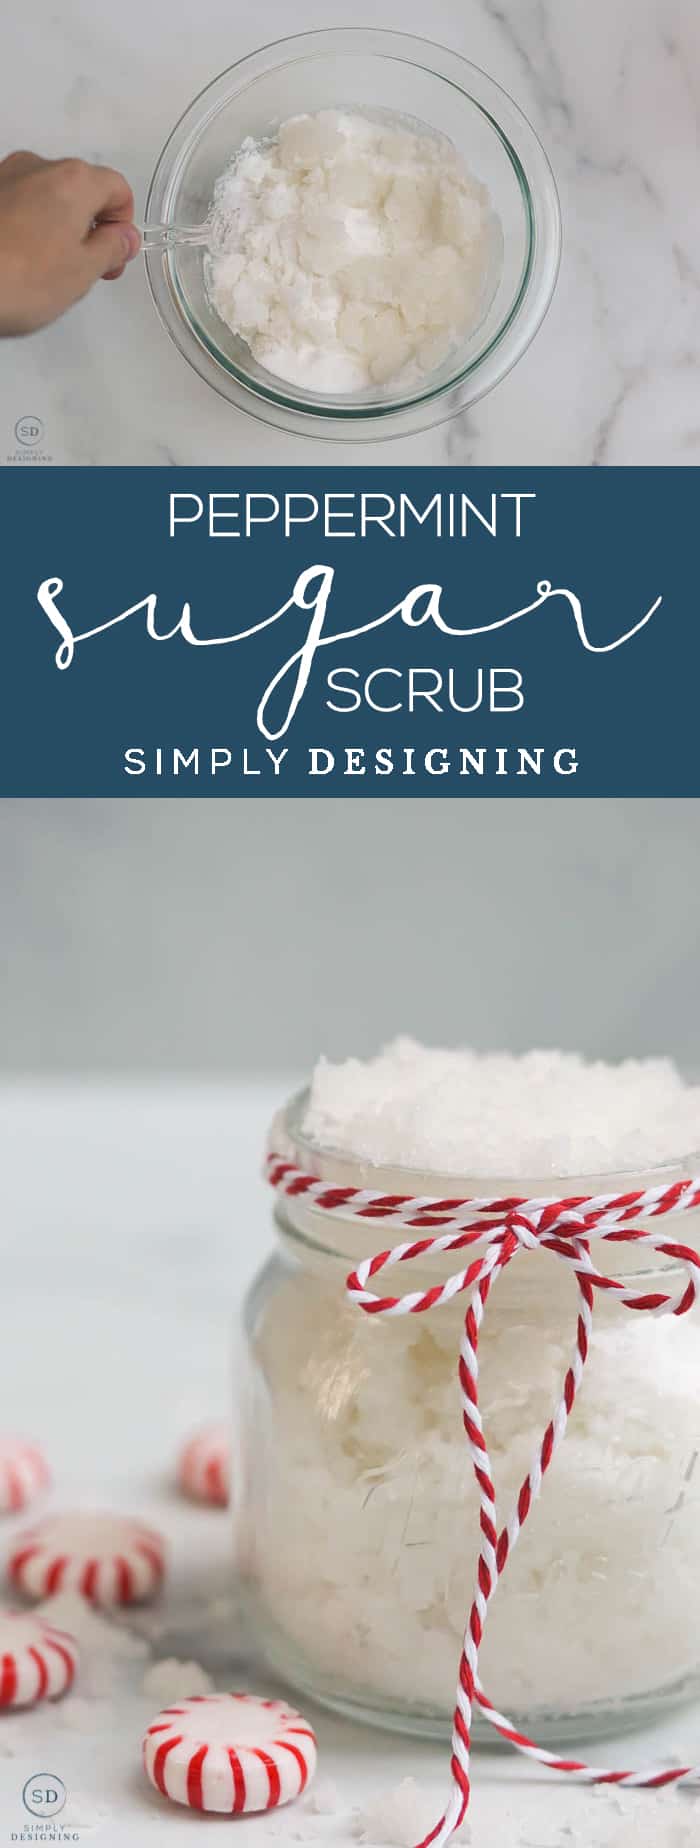 Peppermint Sugar Scrub - this easy peppermint sugar scrub recipe only requires 3 ingredients and will soothe and exfoliate your hands in one quick step